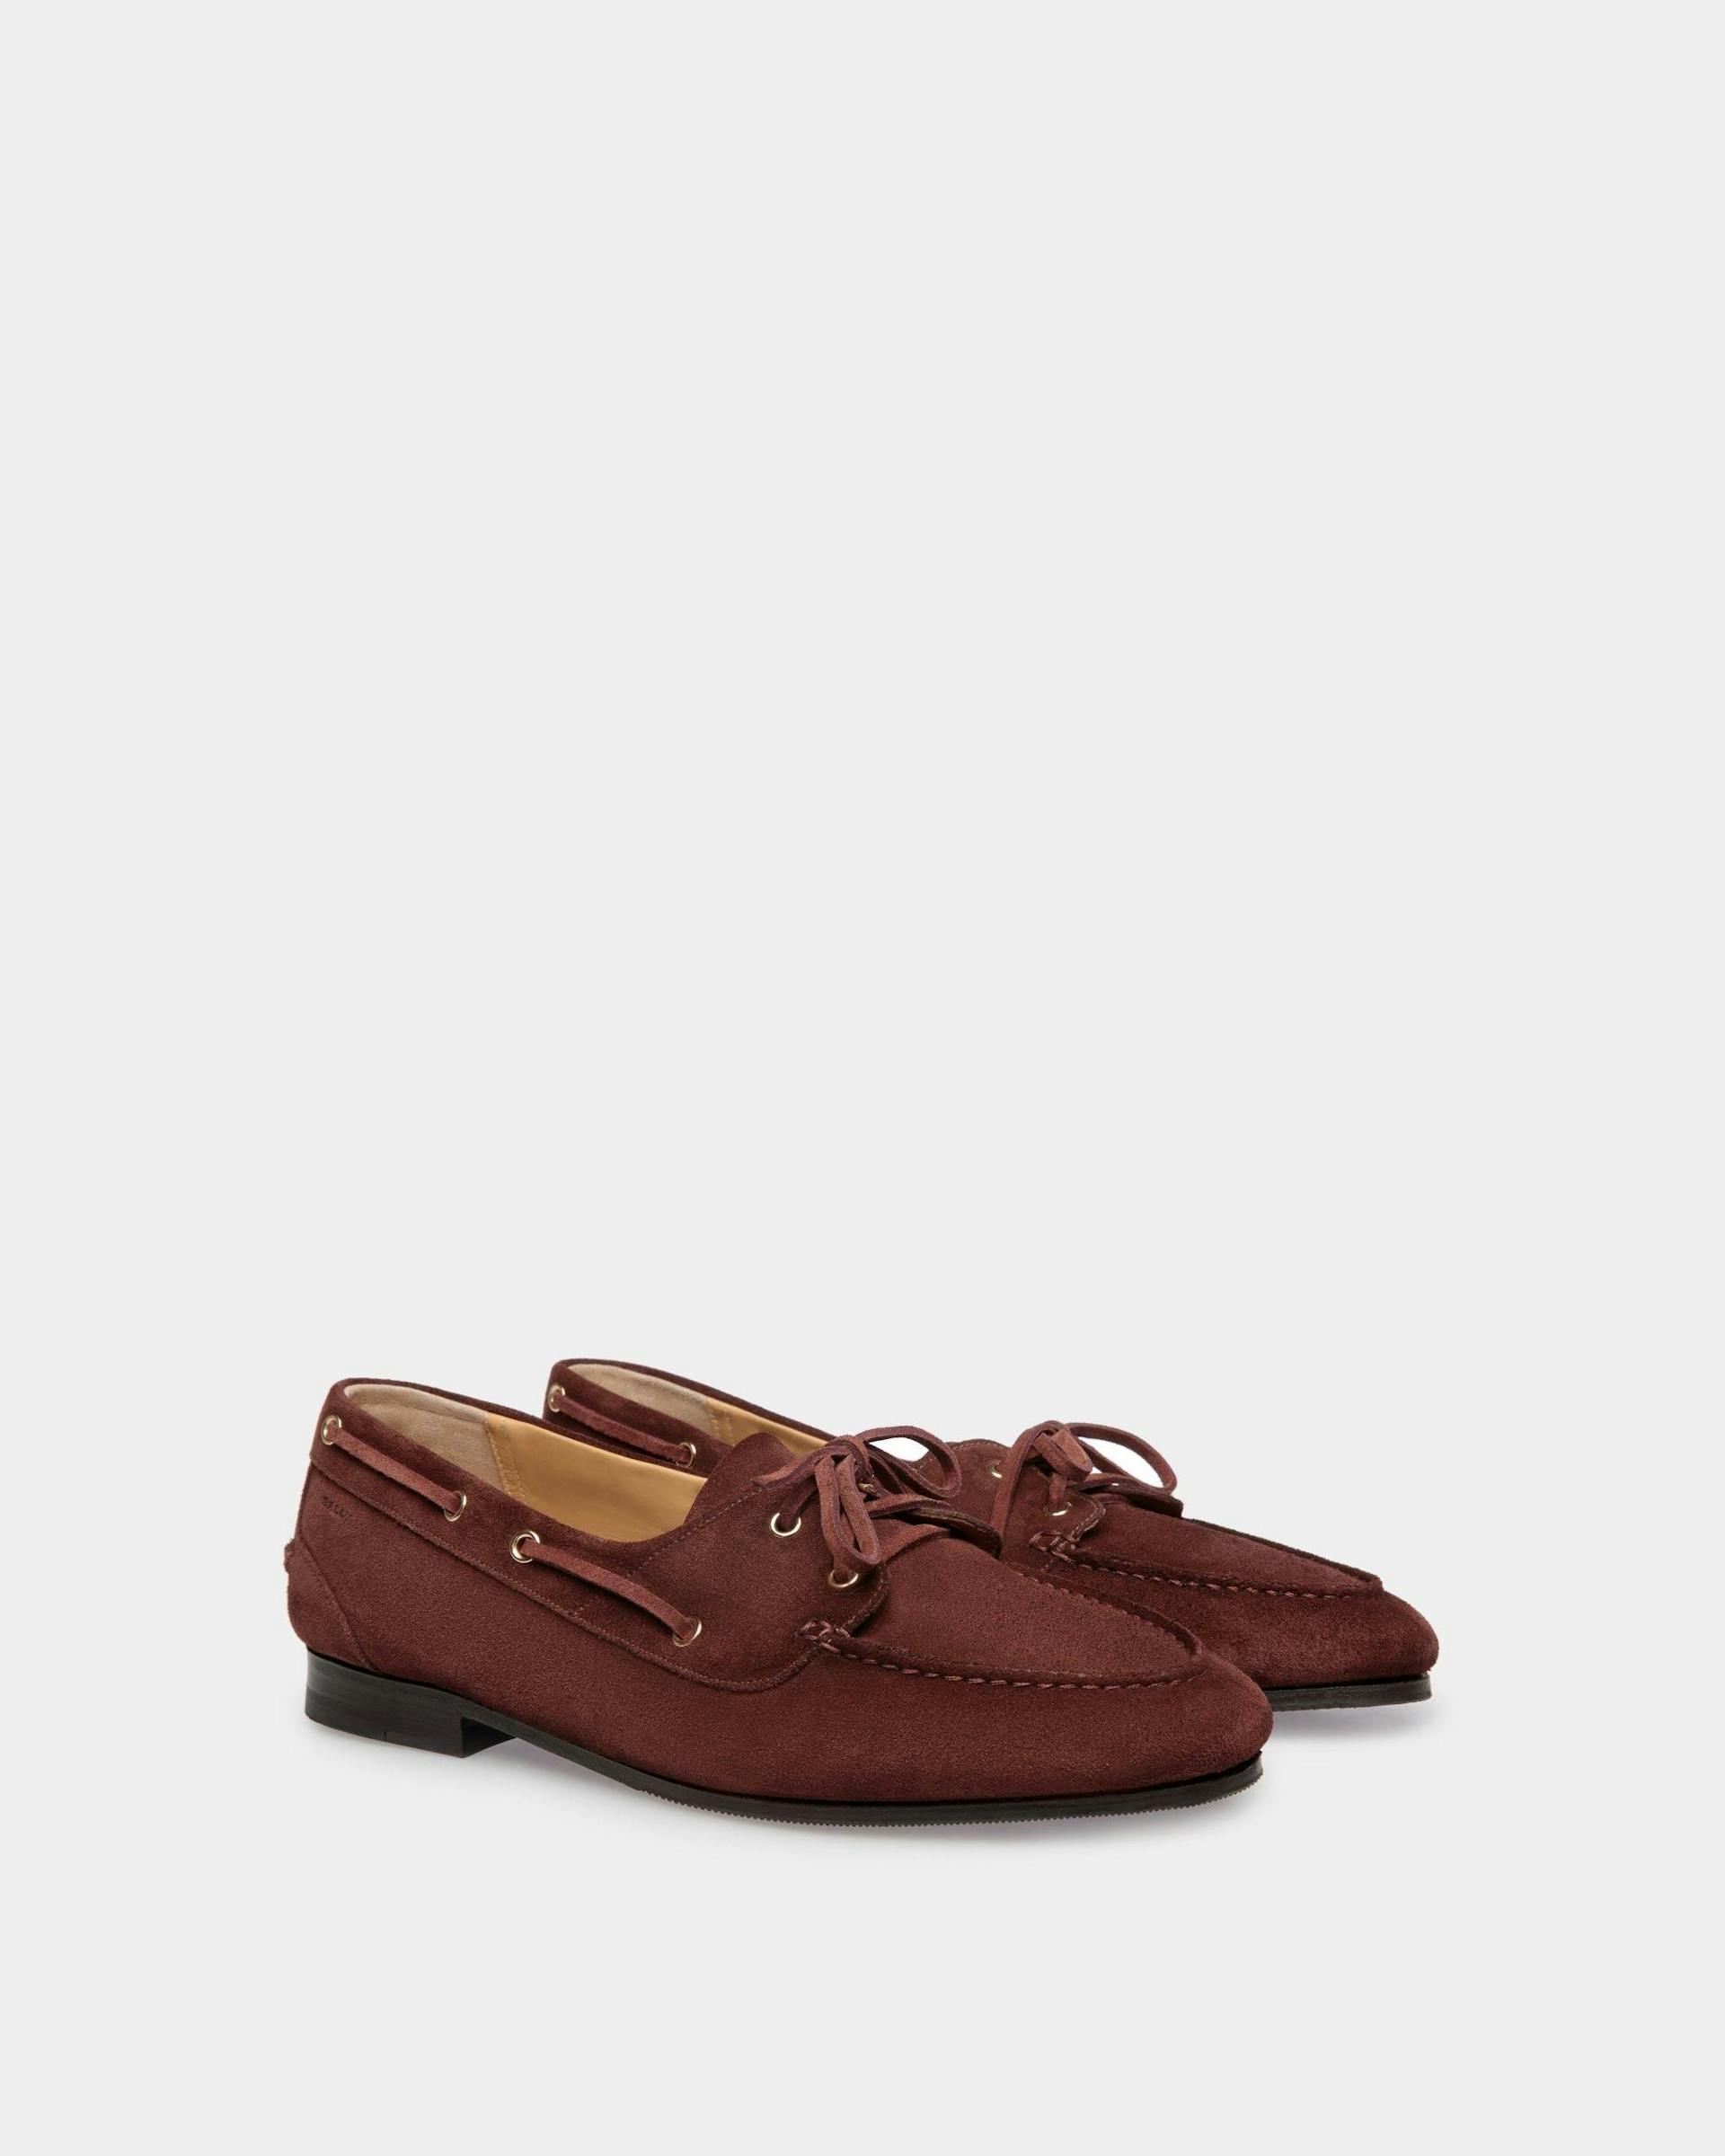 Men's Plume Moccasin in Chestnut Brown Suede | Bally | Still Life 3/4 Front